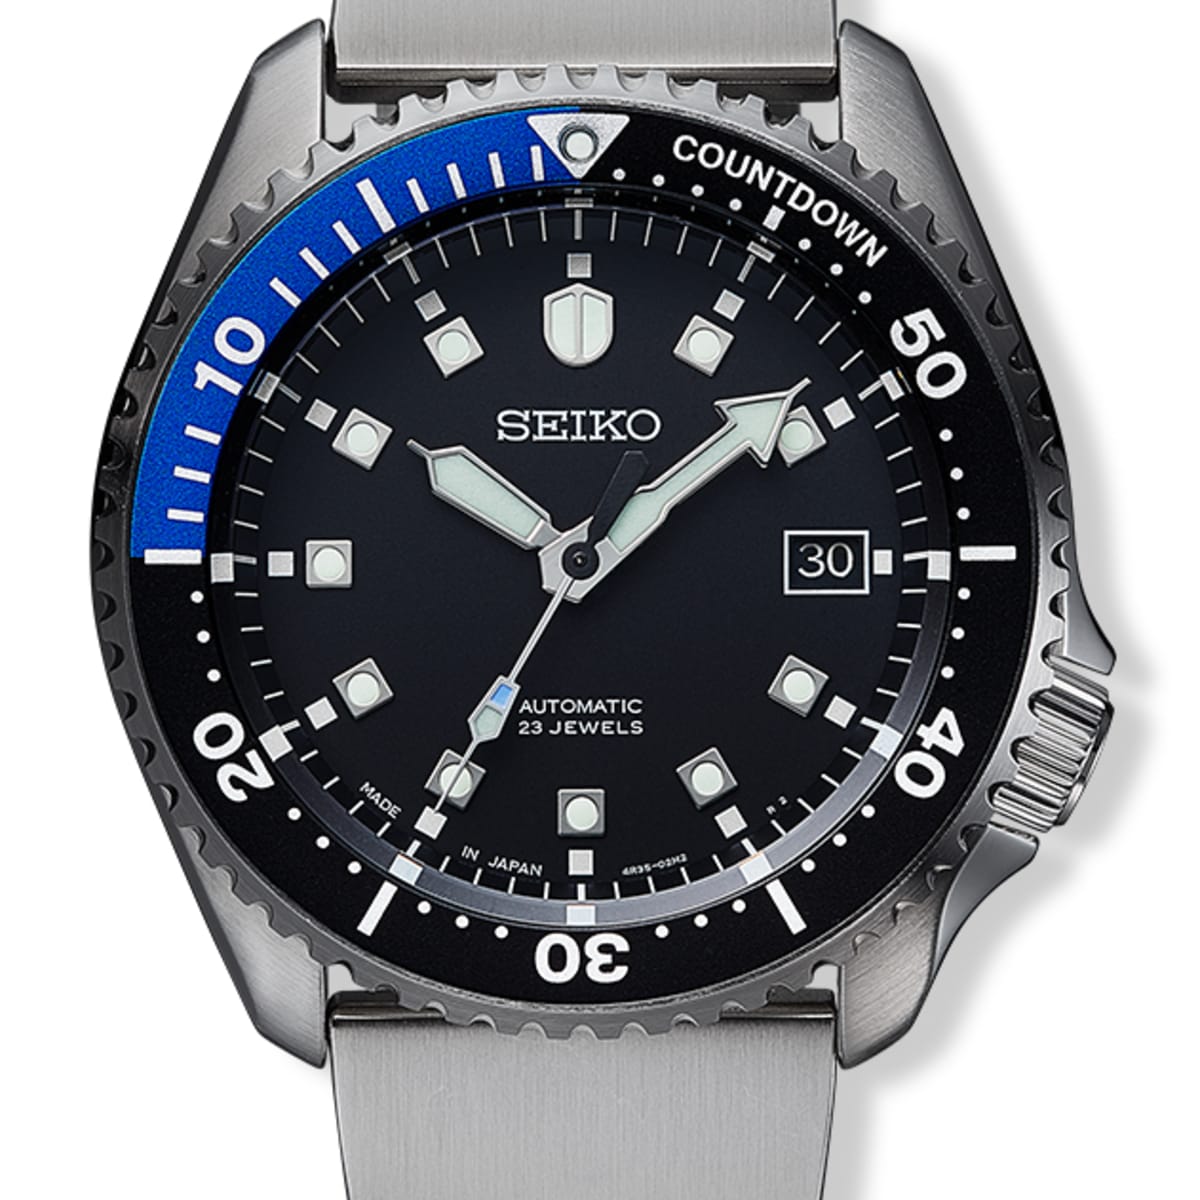 Seiko Japan is adding Sony wena technology to its latest watches